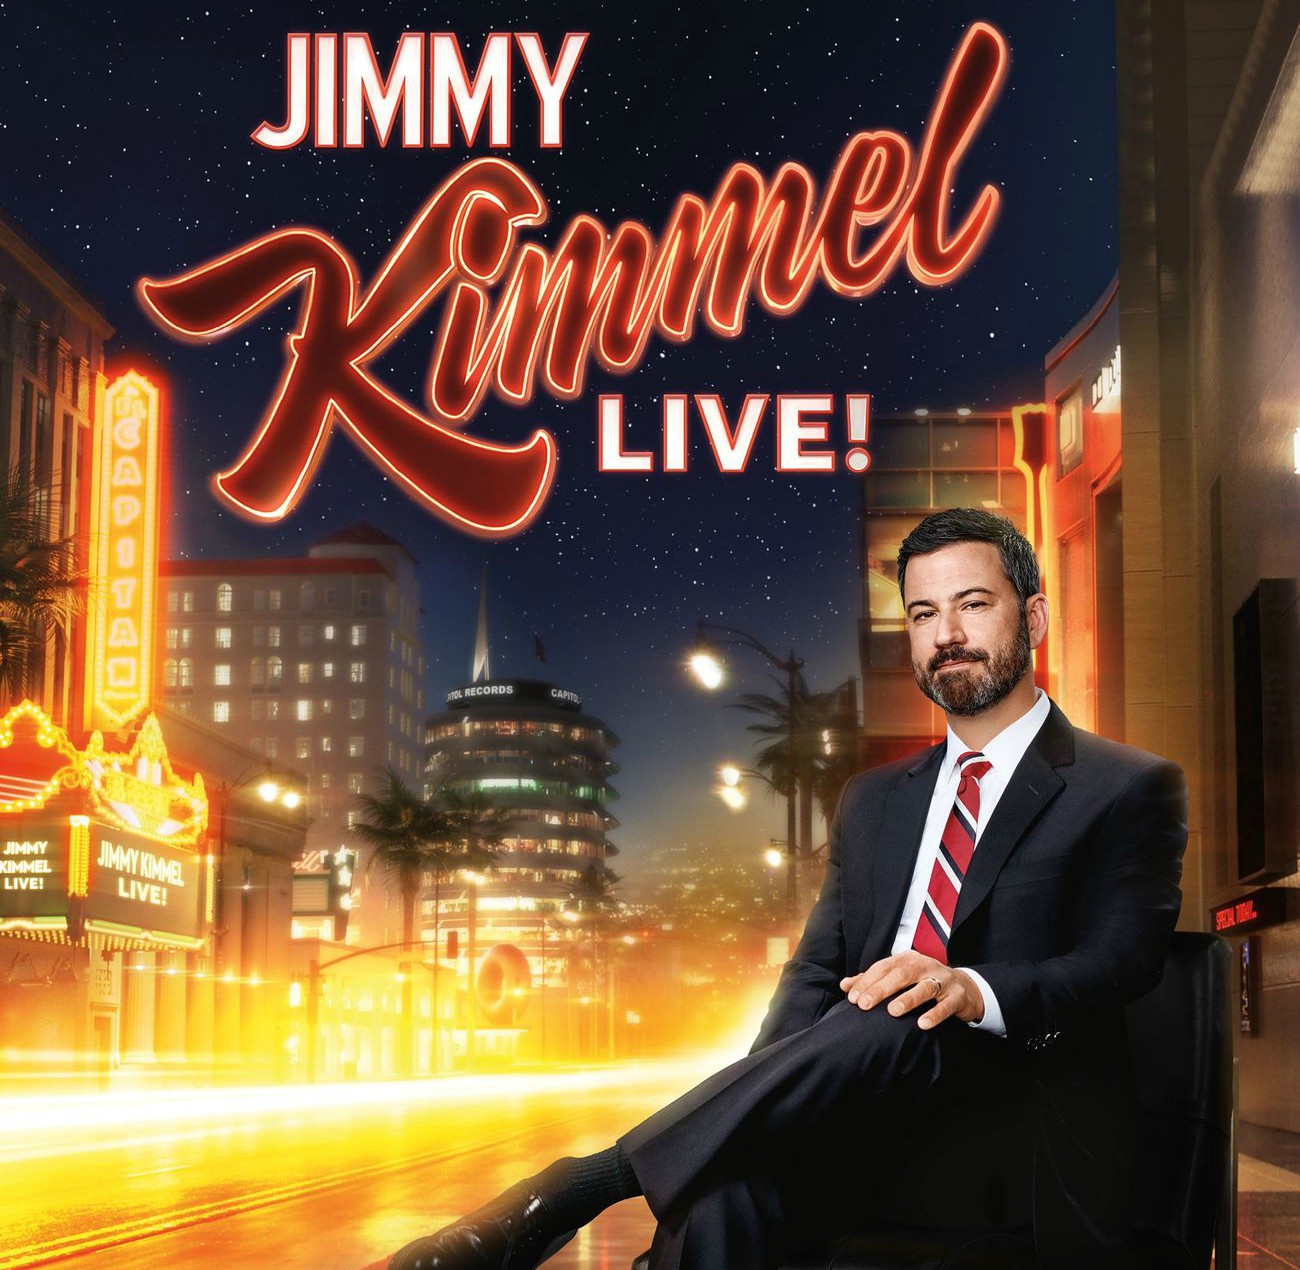 Guests Announced for ABC’s ‘Jimmy Kimmel Live!,’ Sept. 7-8